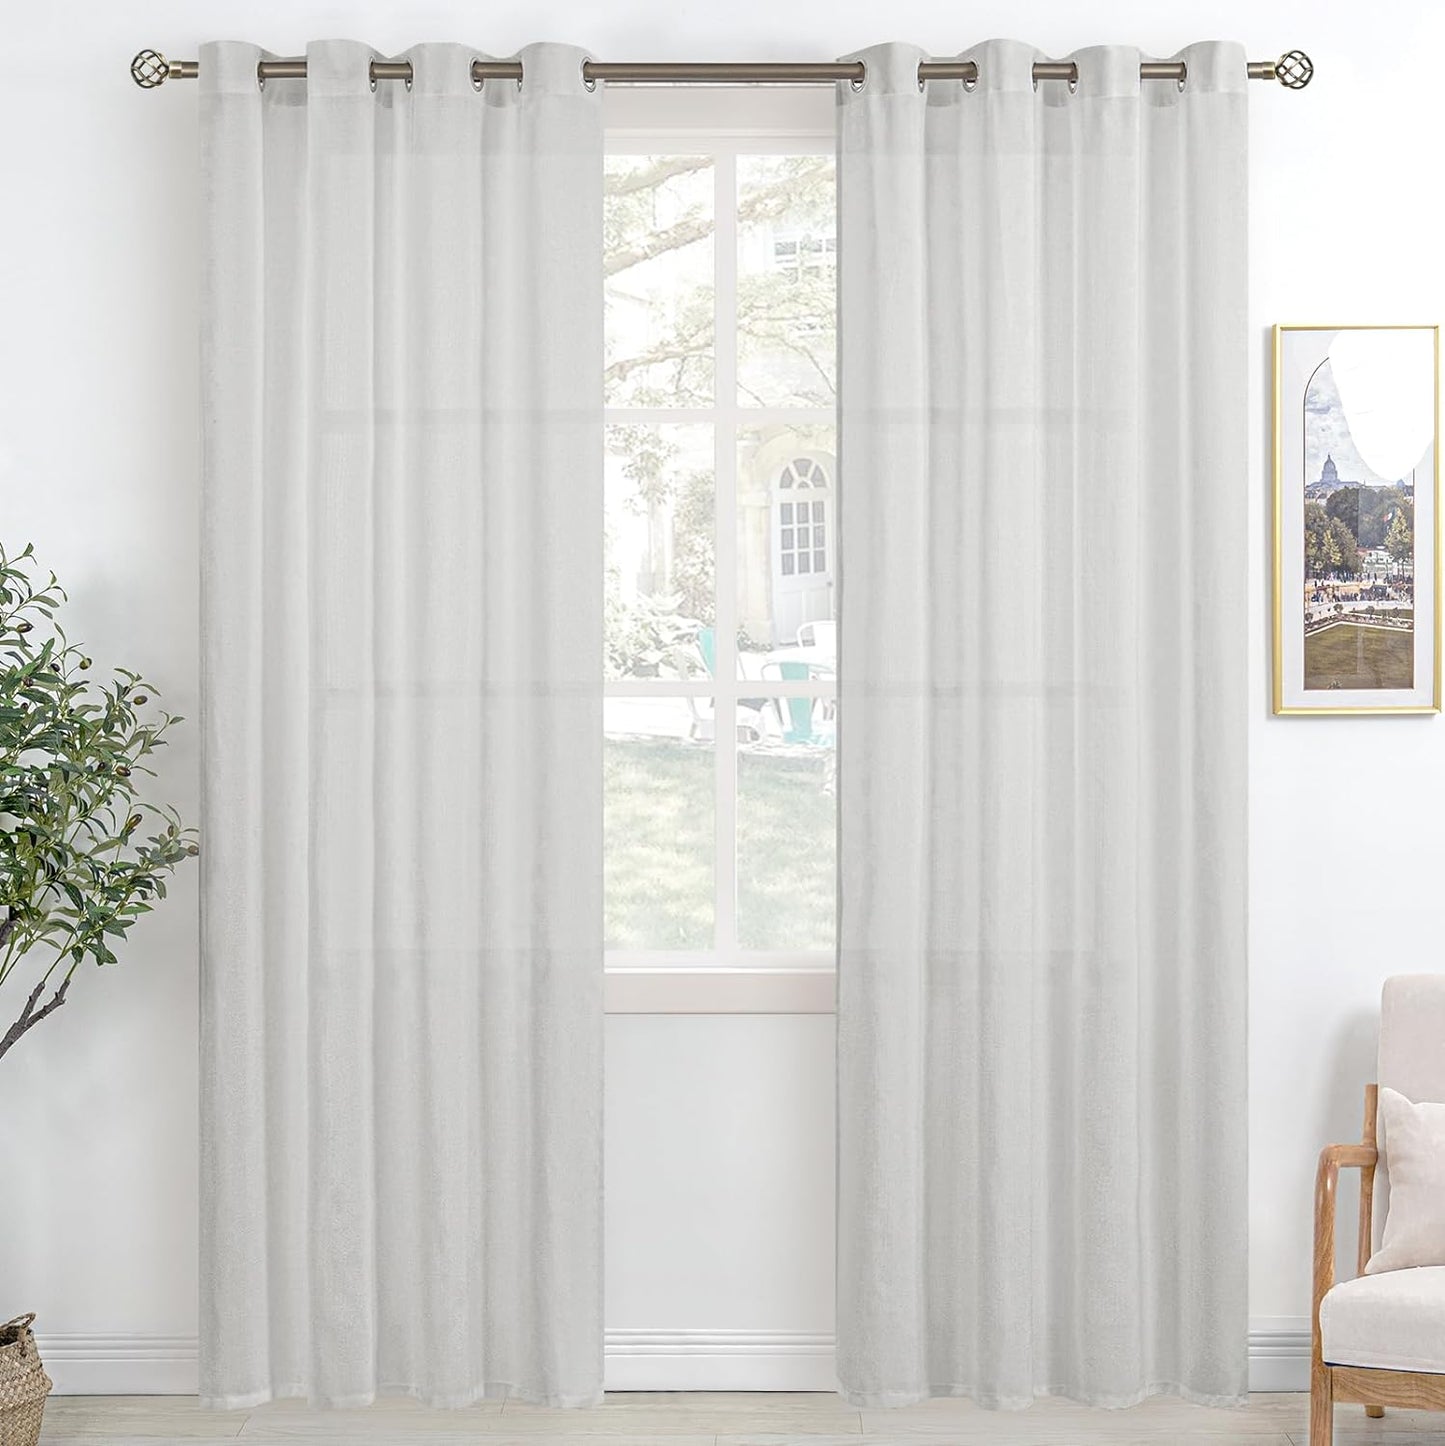 Bgment Natural Linen Look Semi Sheer Curtains for Bedroom, 52 X 54 Inch White Grommet Light Filtering Casual Textured Privacy Curtains for Bay Window, 2 Panels  BGment Light Grey 52W X 84L 